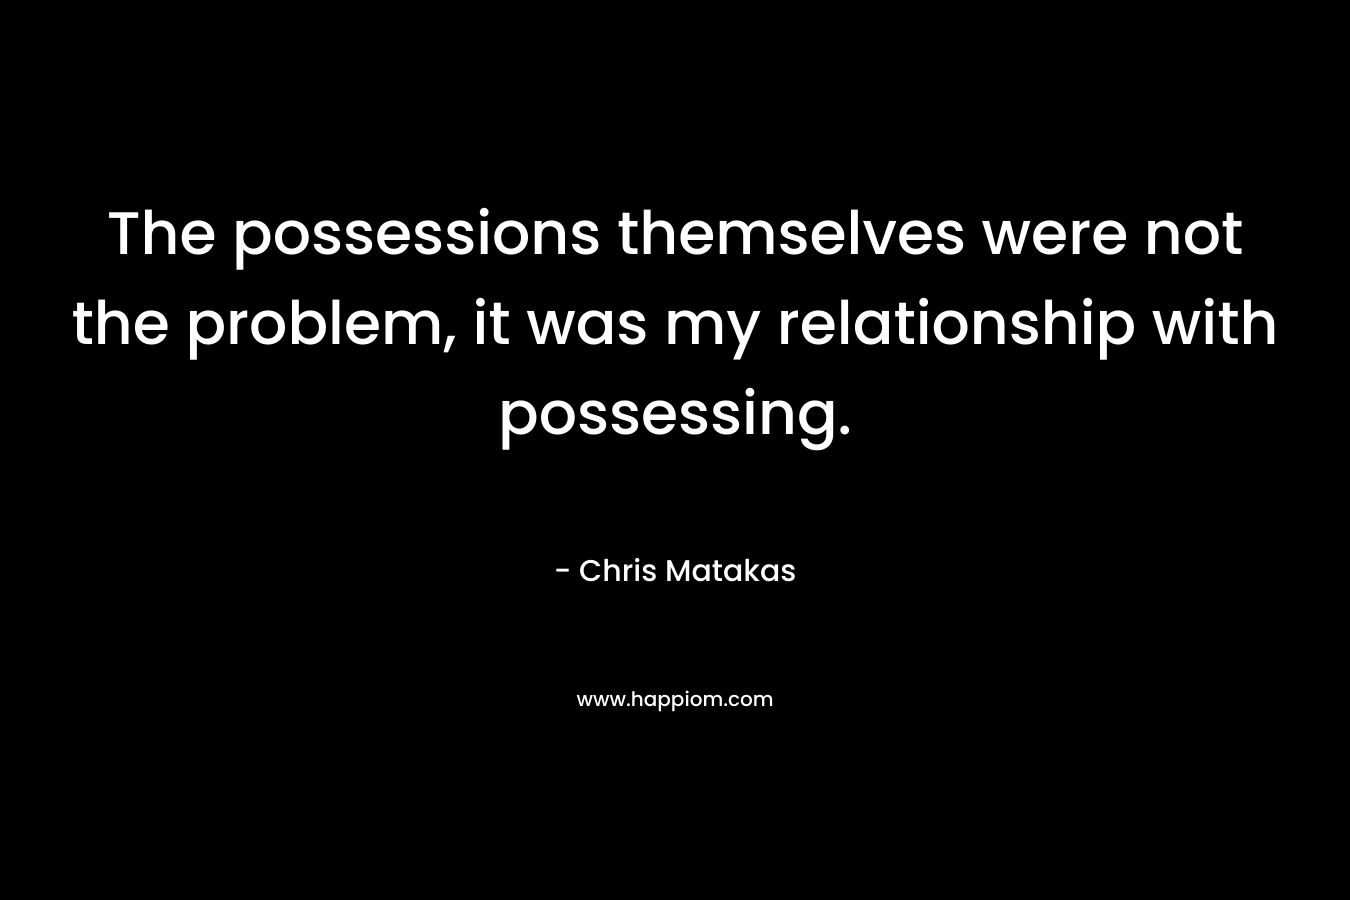 The possessions themselves were not the problem, it was my relationship with possessing. – Chris Matakas